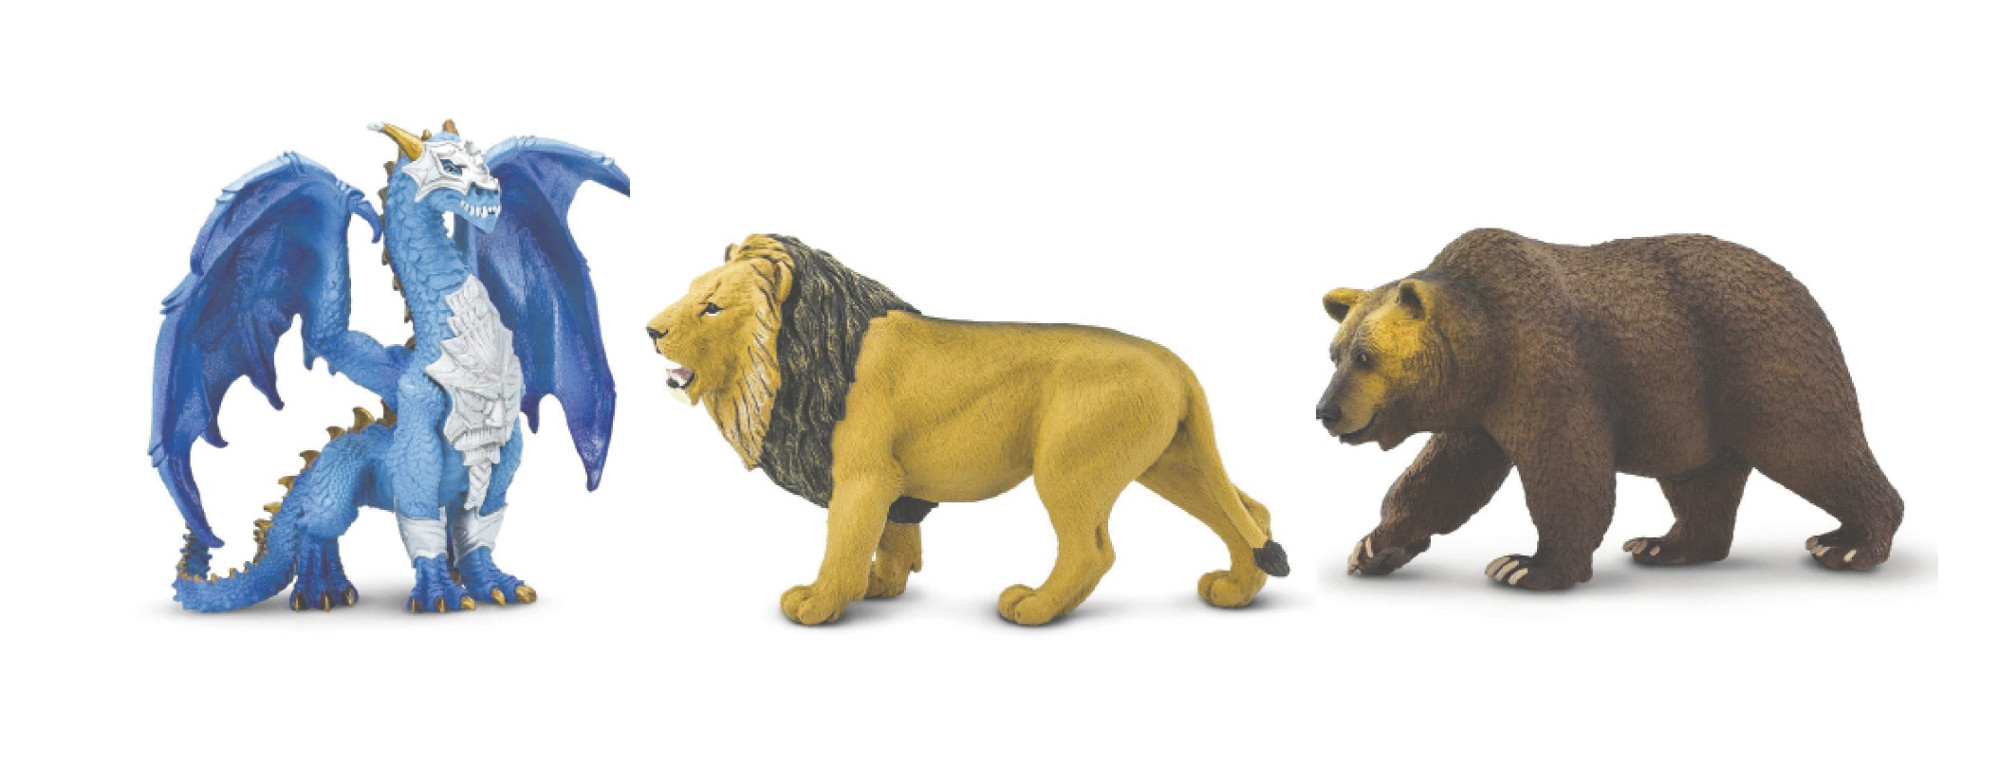 Toy figurines sold by Safari Programs include the Guardian Dragon ($20.99), Lion ($15.74) and Grizzly Bear ($20.99)